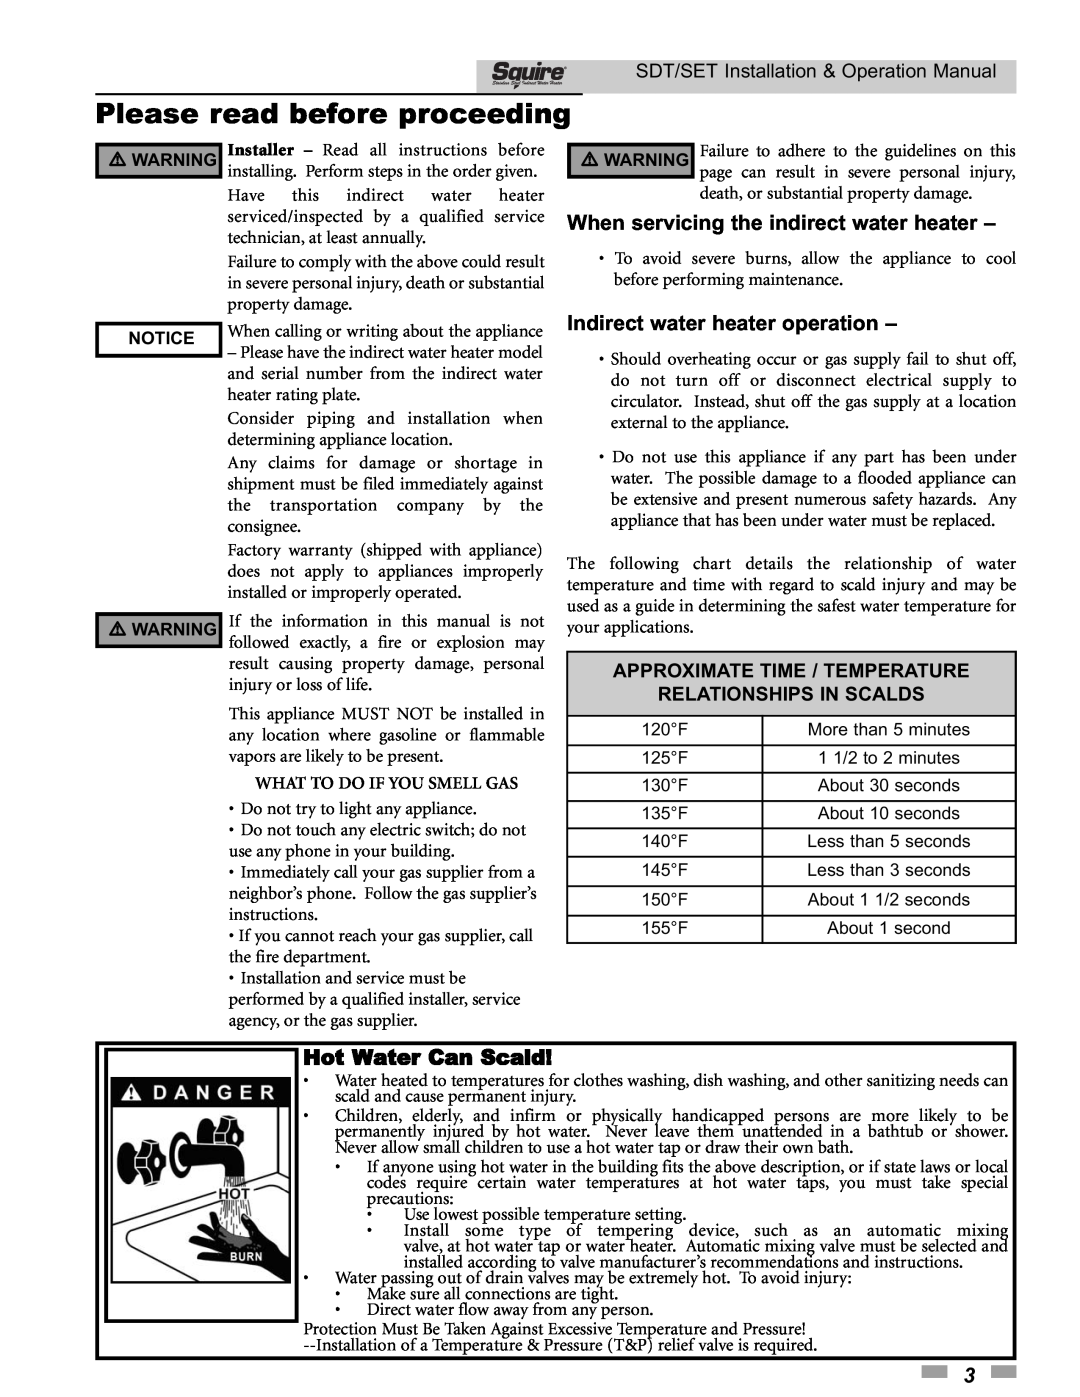 Lochinvar SDT/SET065 - 119 Please read before proceeding, When servicing the indirect water heater, Hot Water Can Scald 